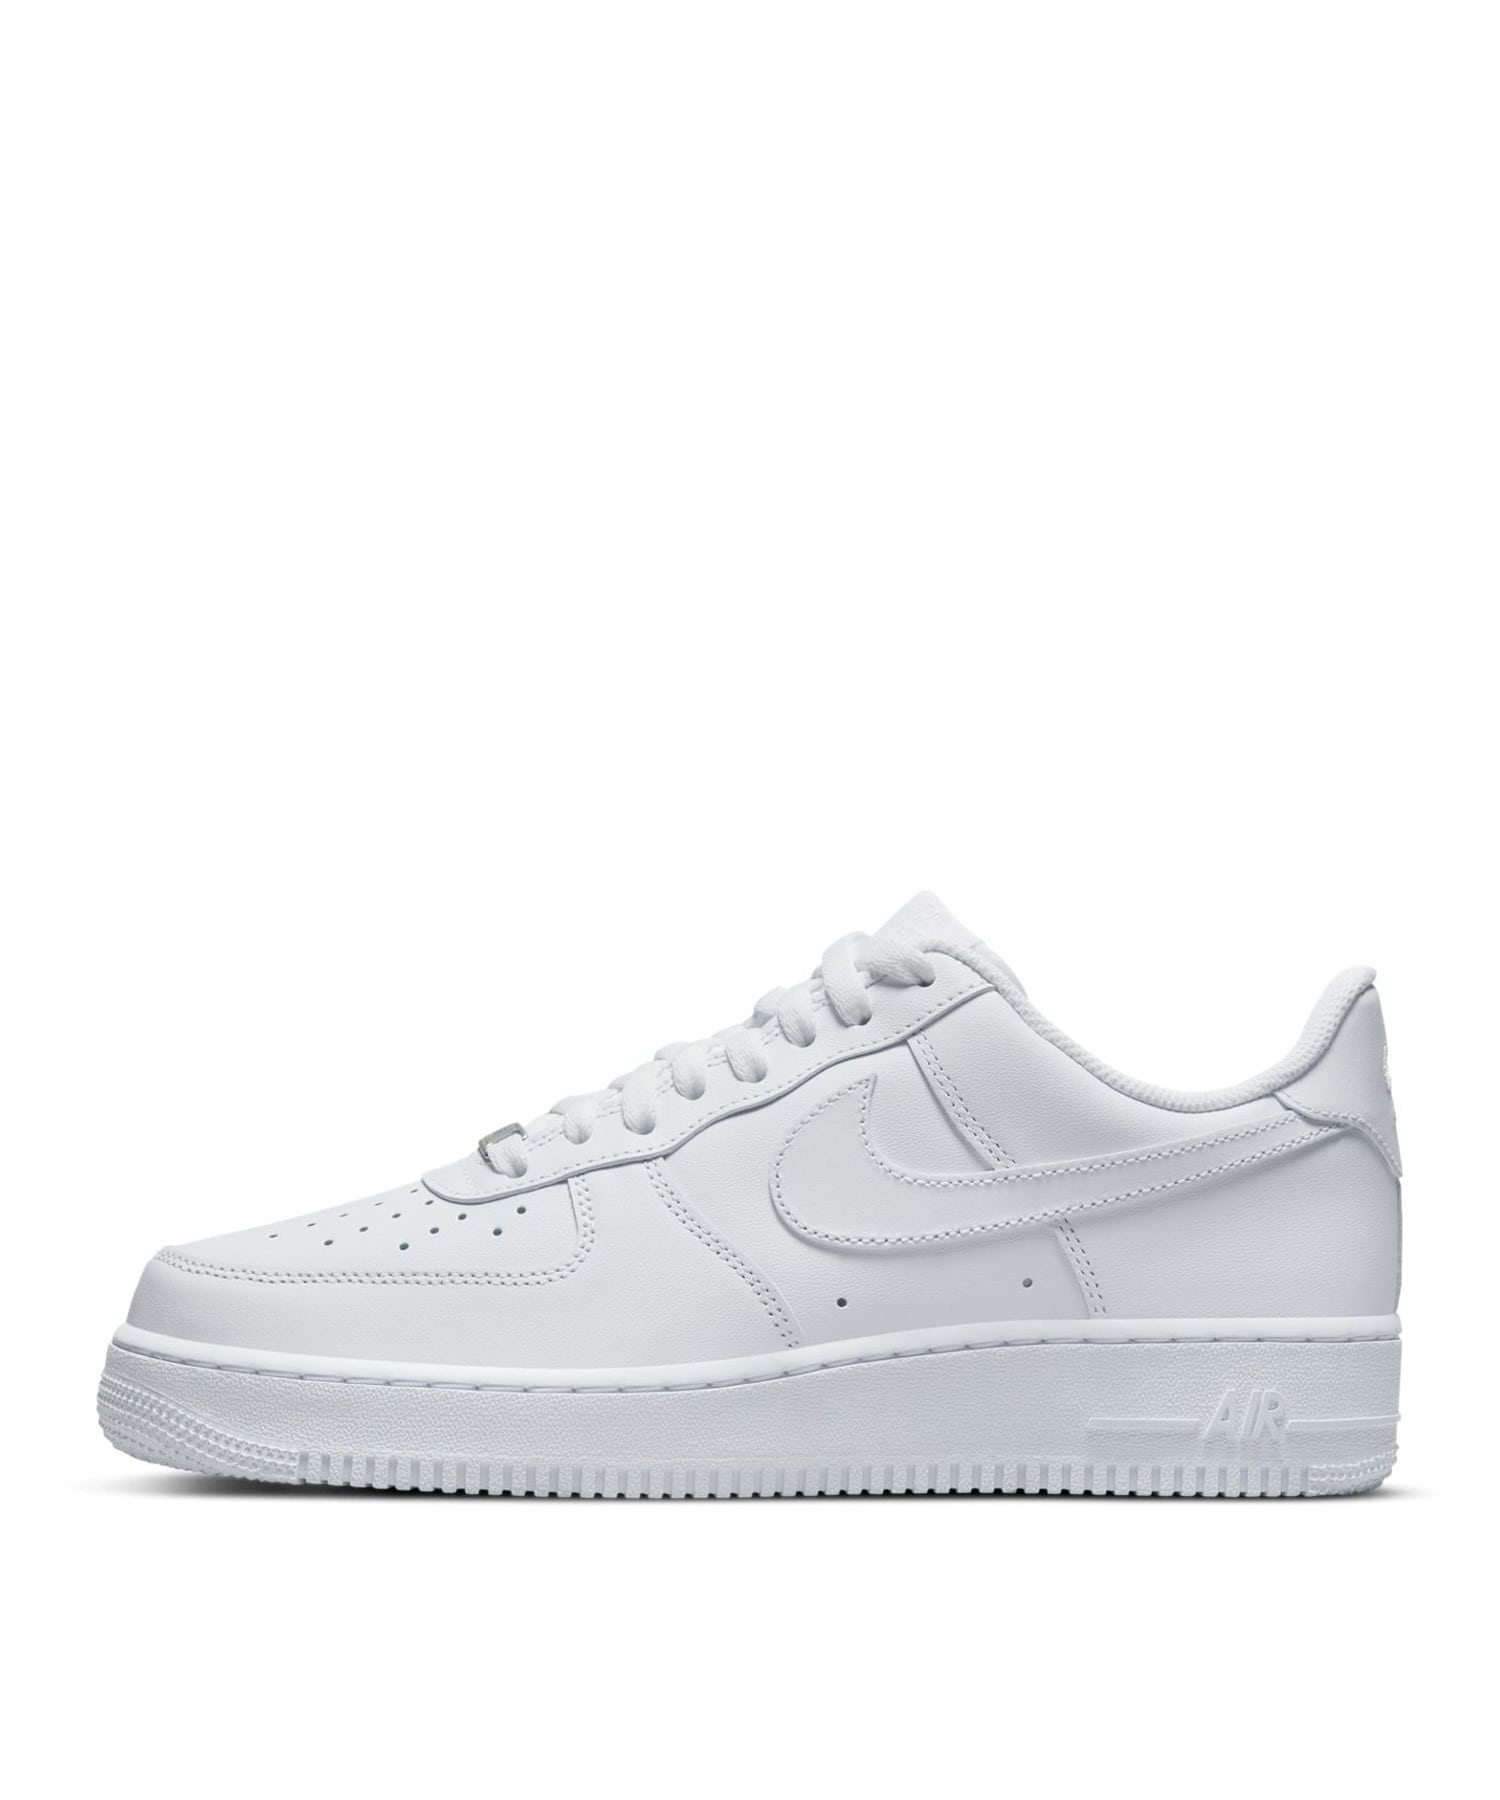 stores that carry air force 1